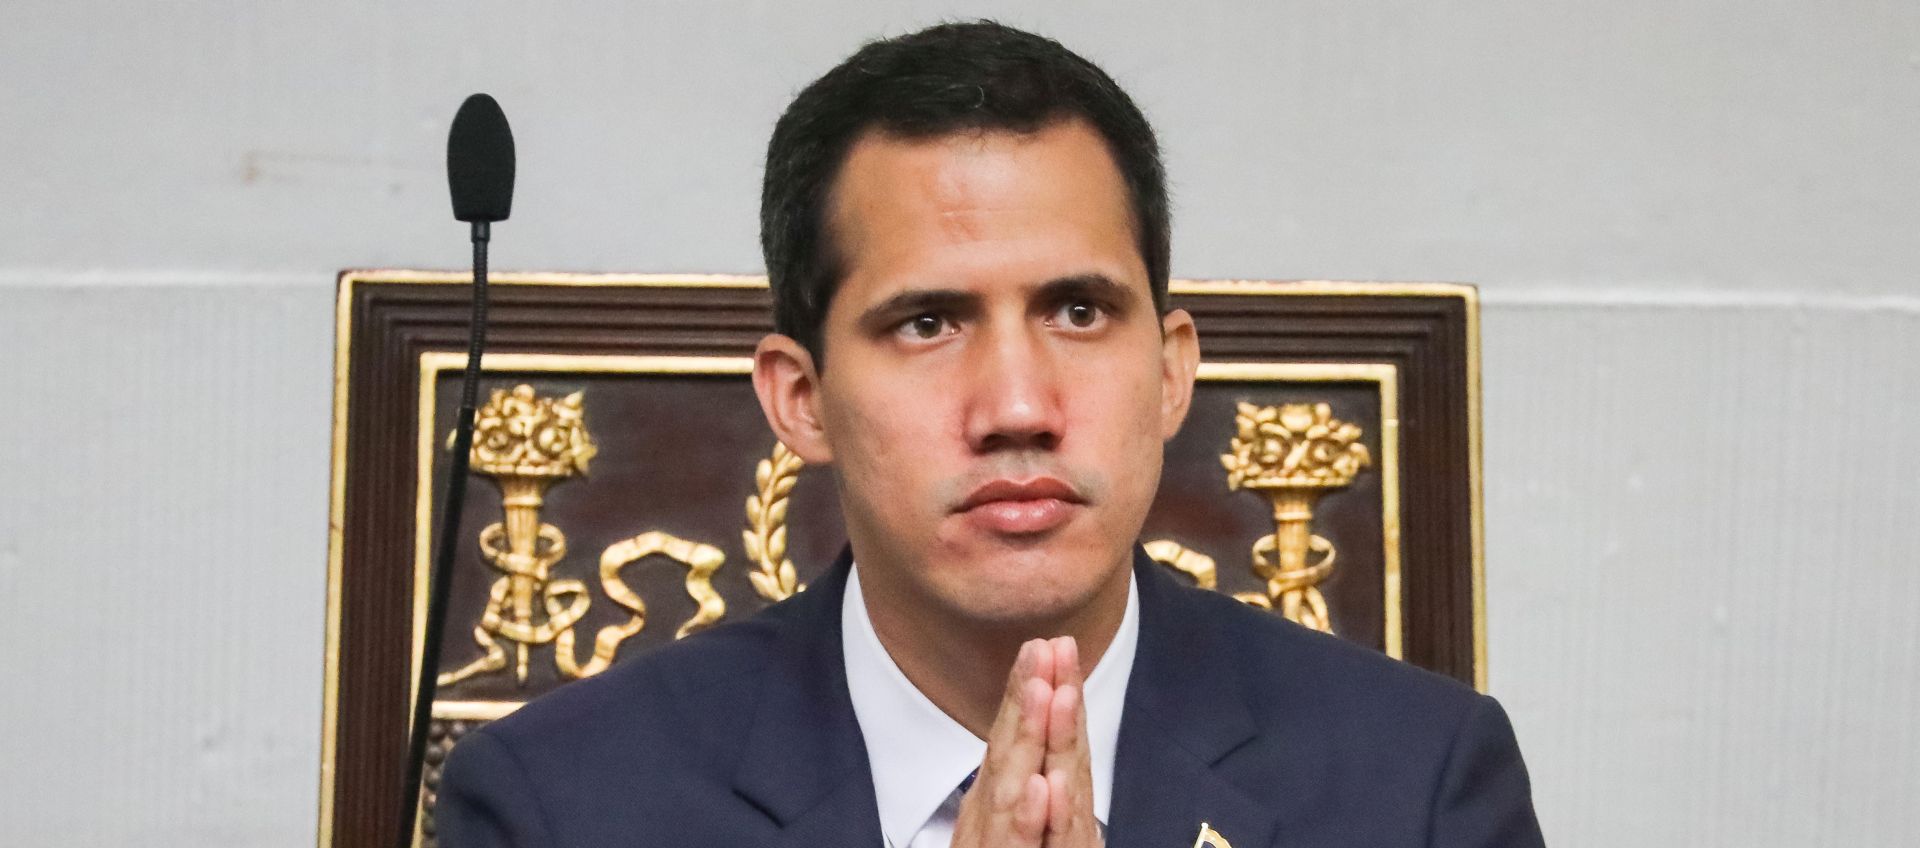 epa07346145 President of the Venezuelan National Assembly Juan Guaido takes part in a session of the body, in Caracas, Venezuela, 05 February 2019, during which he stated that the best for Russia and China is a change of Government in Venezuela. Venezuela's President Maduro and his opponent National Assembly leader Juan Guaido have called on their supporters to take to the streets as international pressure increased on Maduro to resign. Guiado had declared himself interim president of Venezuela on 23 January and promised to guide the country toward new election as he consider last May's election not valid.  EPA/Miguel Gutierrez